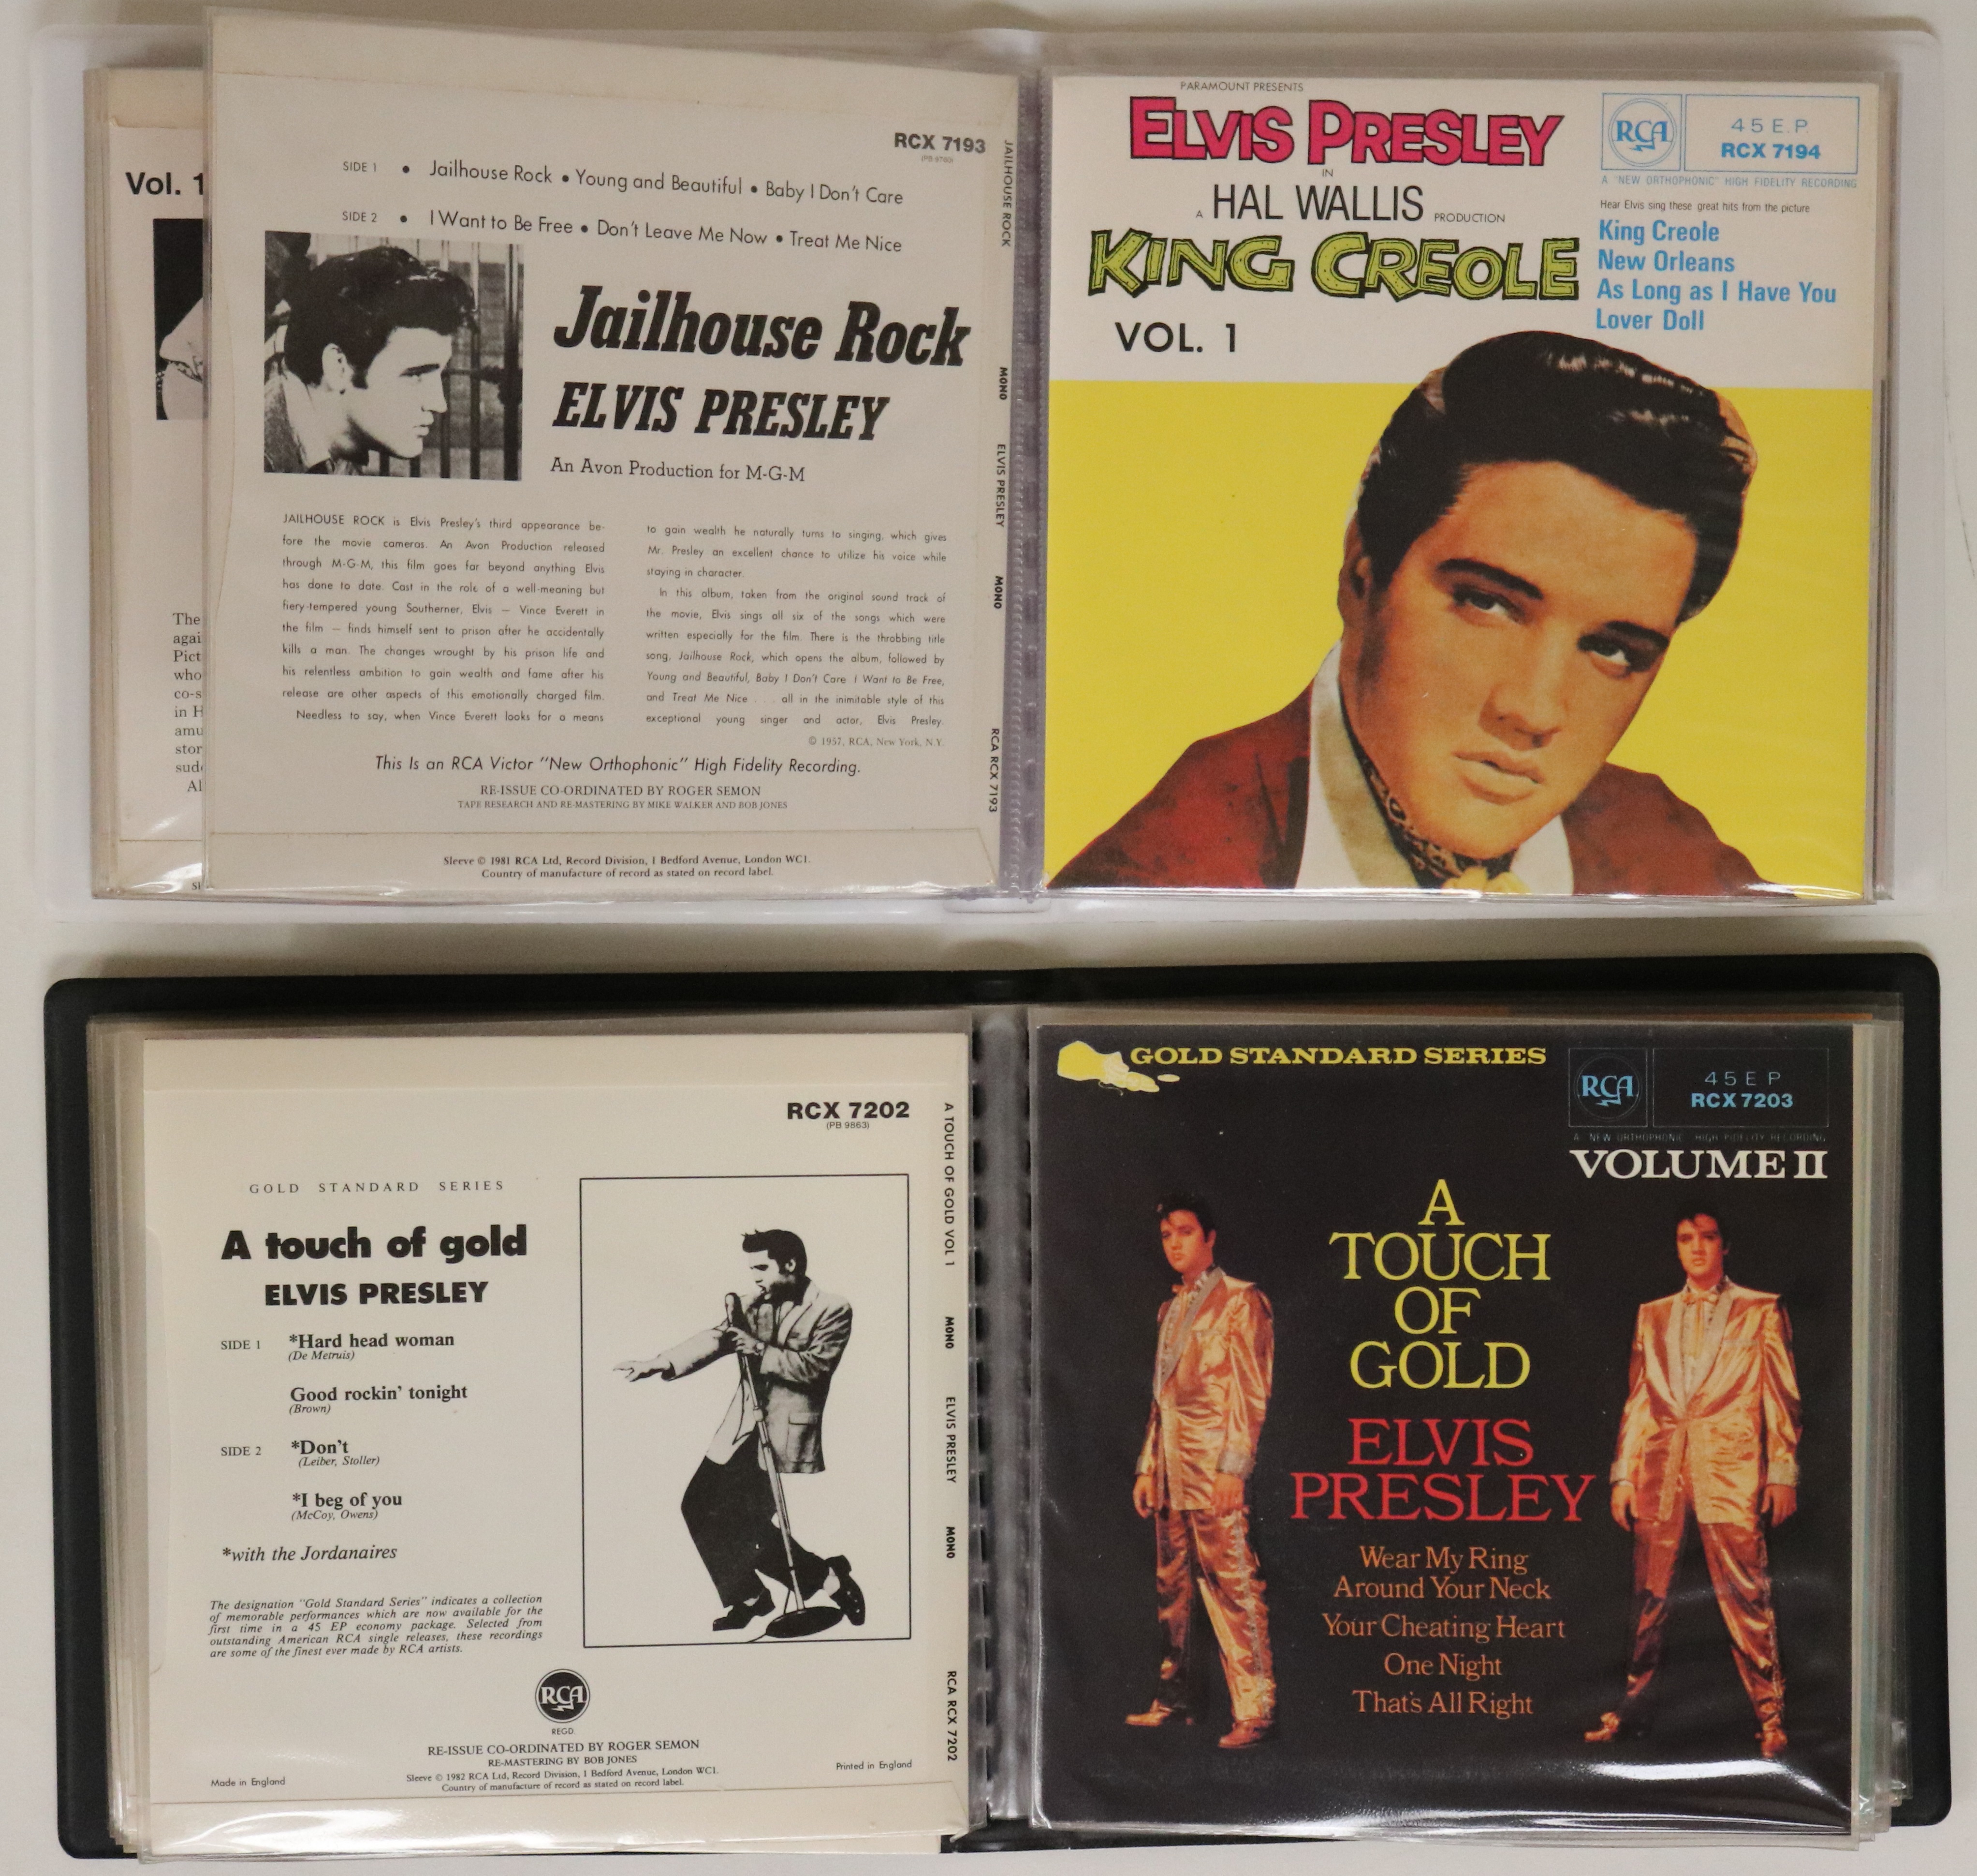 ELVIS PRESLEY - THE E.P. COLLECTION ALBUMS - BOX SETS. - Image 3 of 5